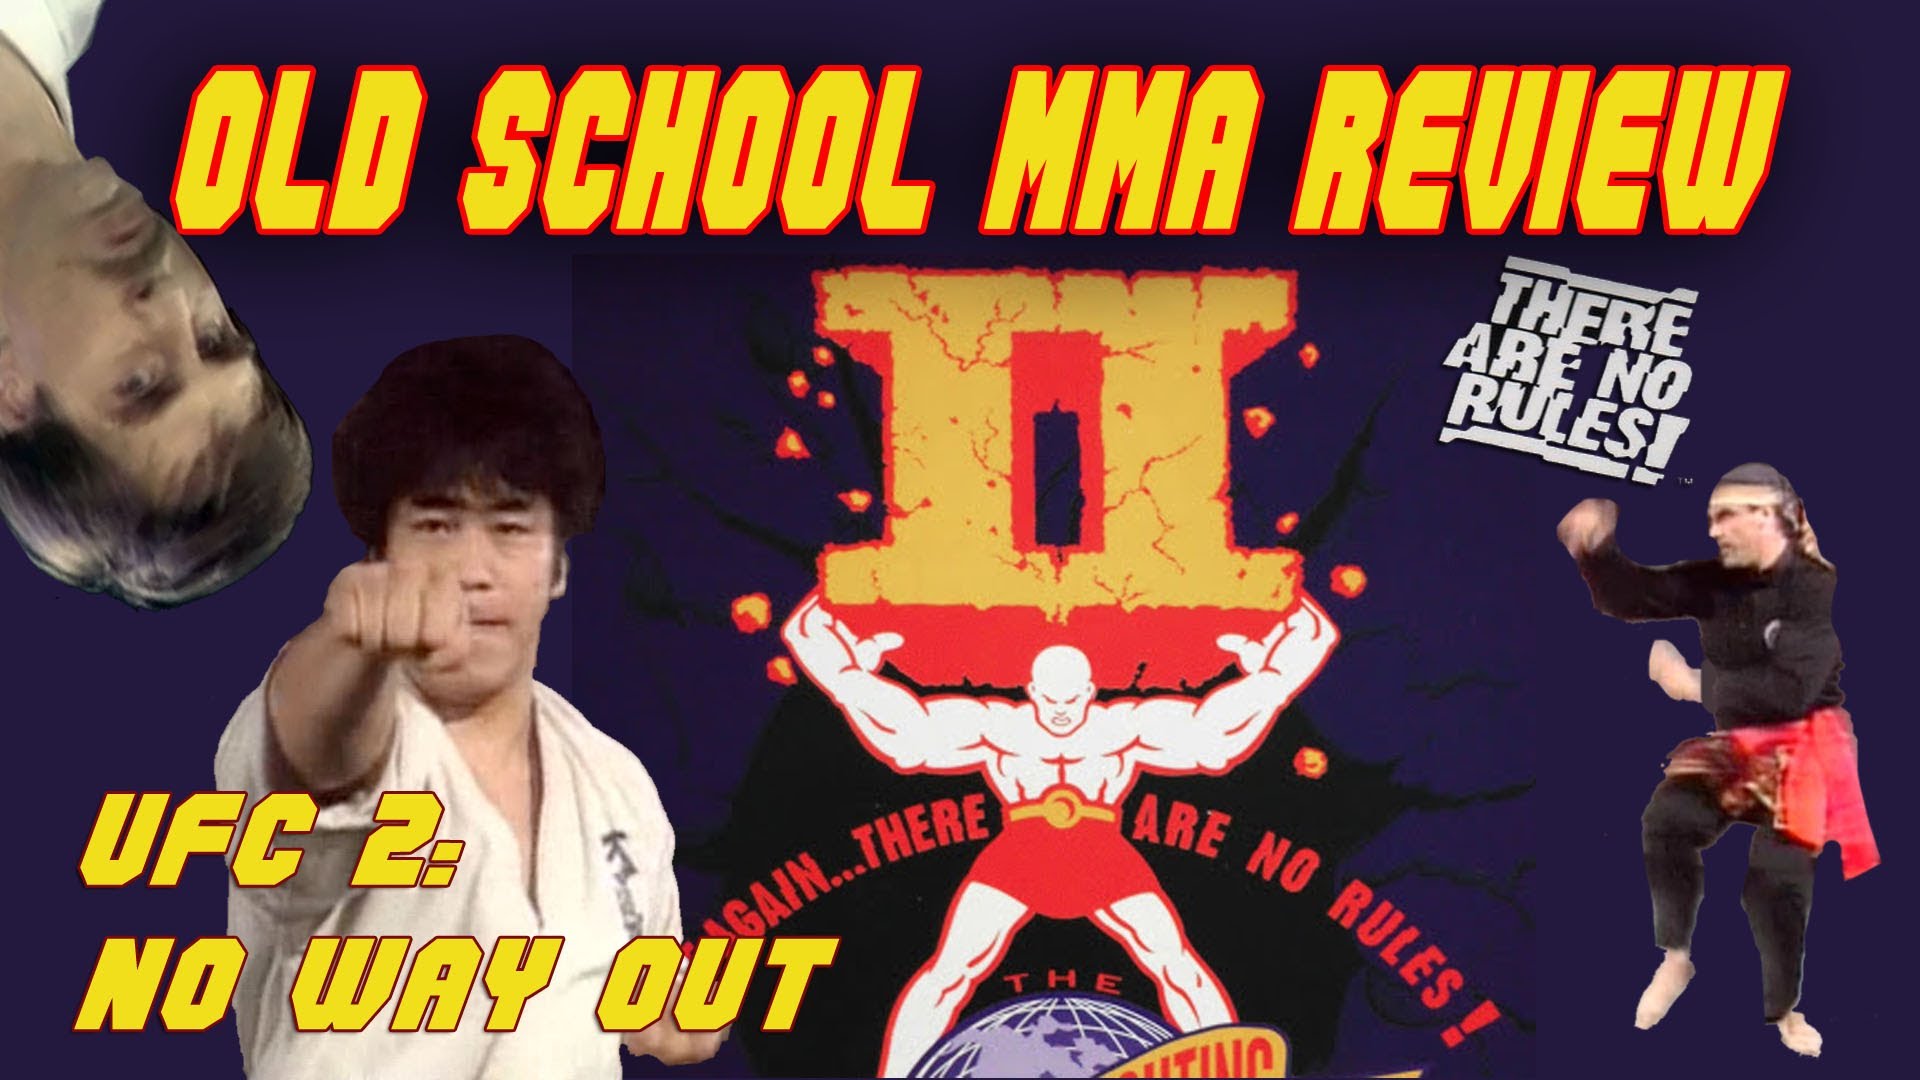 Old School MMA Review: UFC 2 MMA Video